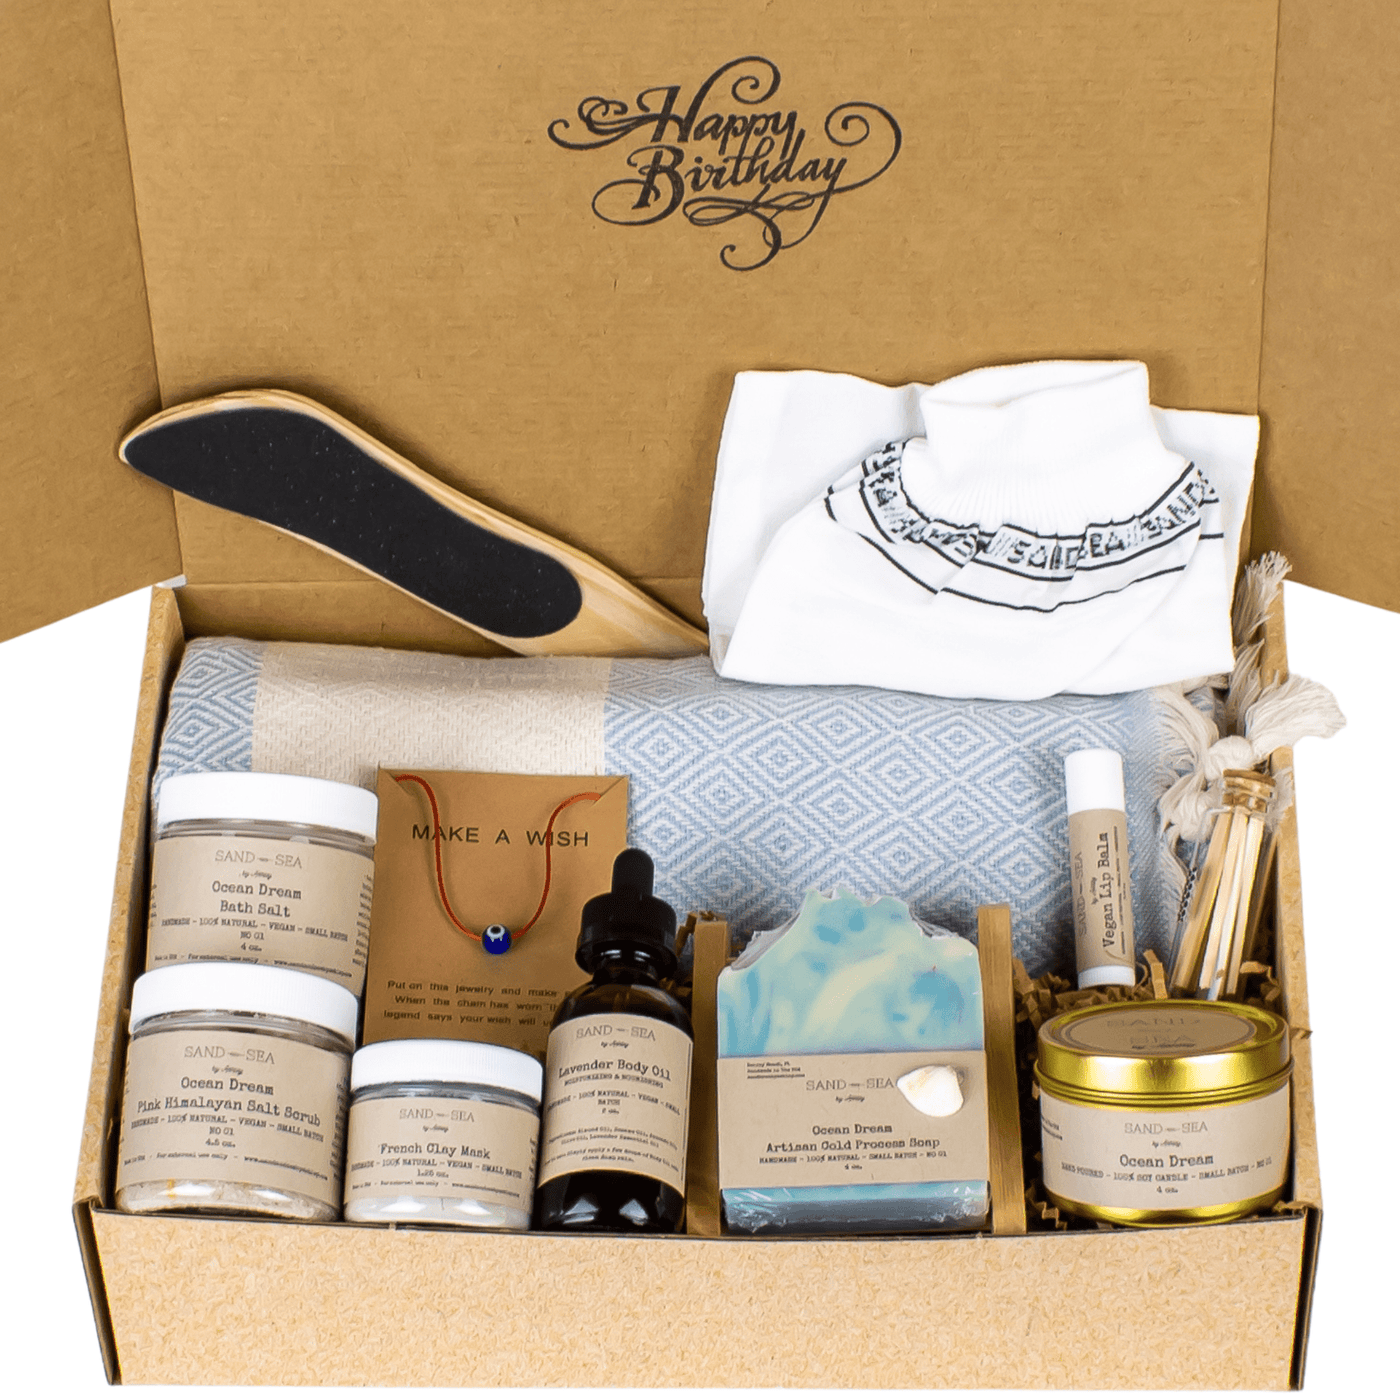 Birthday Gifts for Women, Happy Birthday Bath Set Relaxing Spa Gift Baskets  Ideas for Her, Get Well Soon Gifts for Mom, Sister, Friends, Coworker